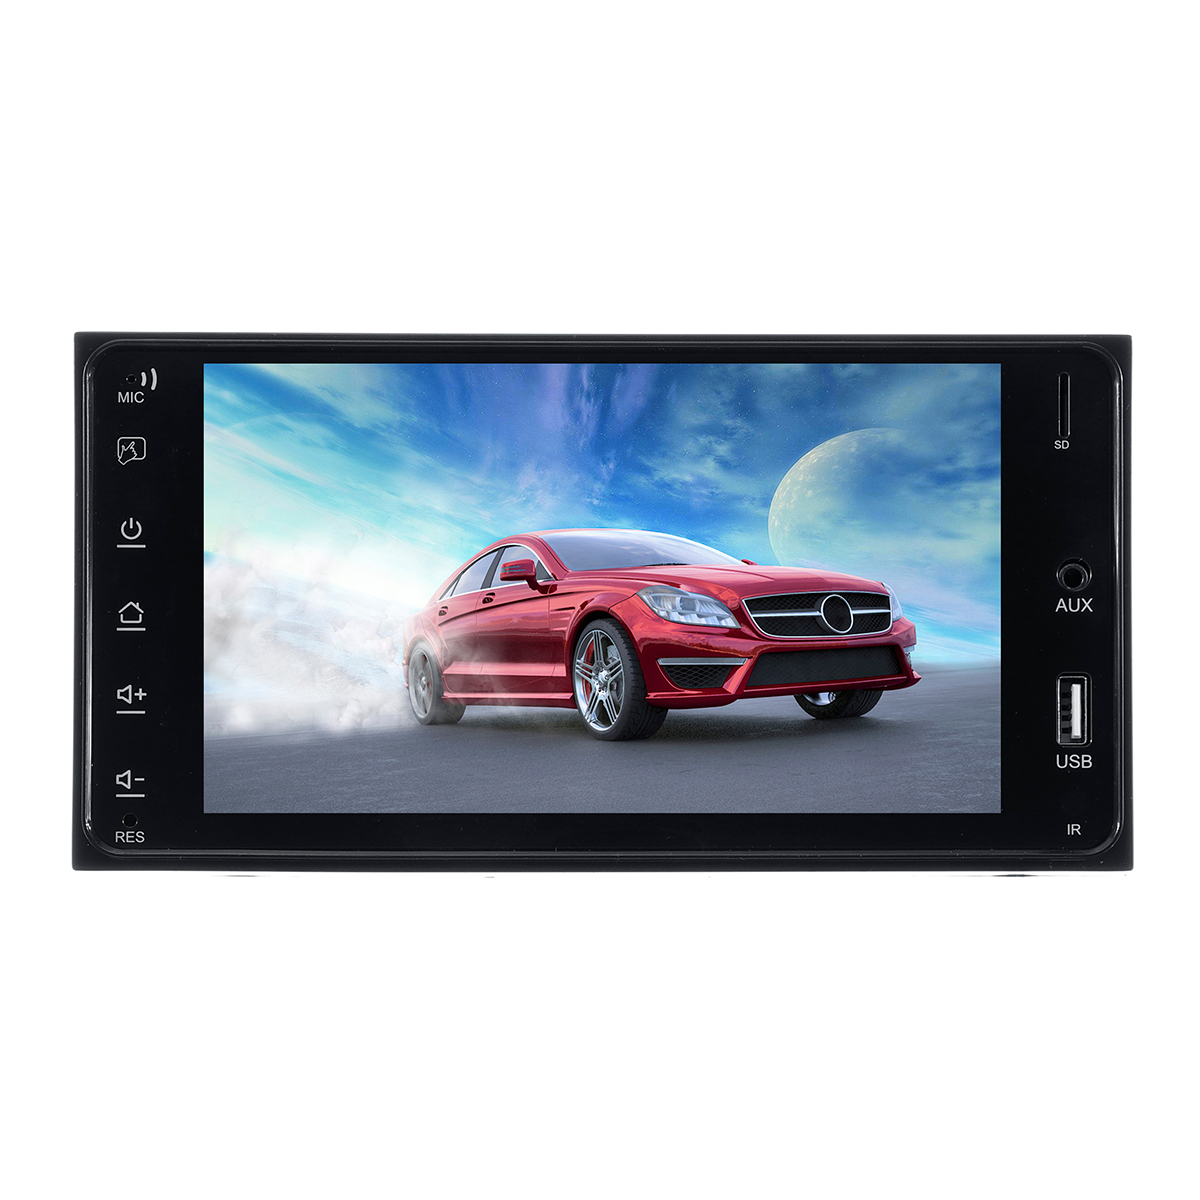 

7Inch 2 Din for Android 8.1 Car MP5 Player 1+16G GPS FM WIFI bluetooth Stereo Radio for Toyota Corolla Hilux RAV4